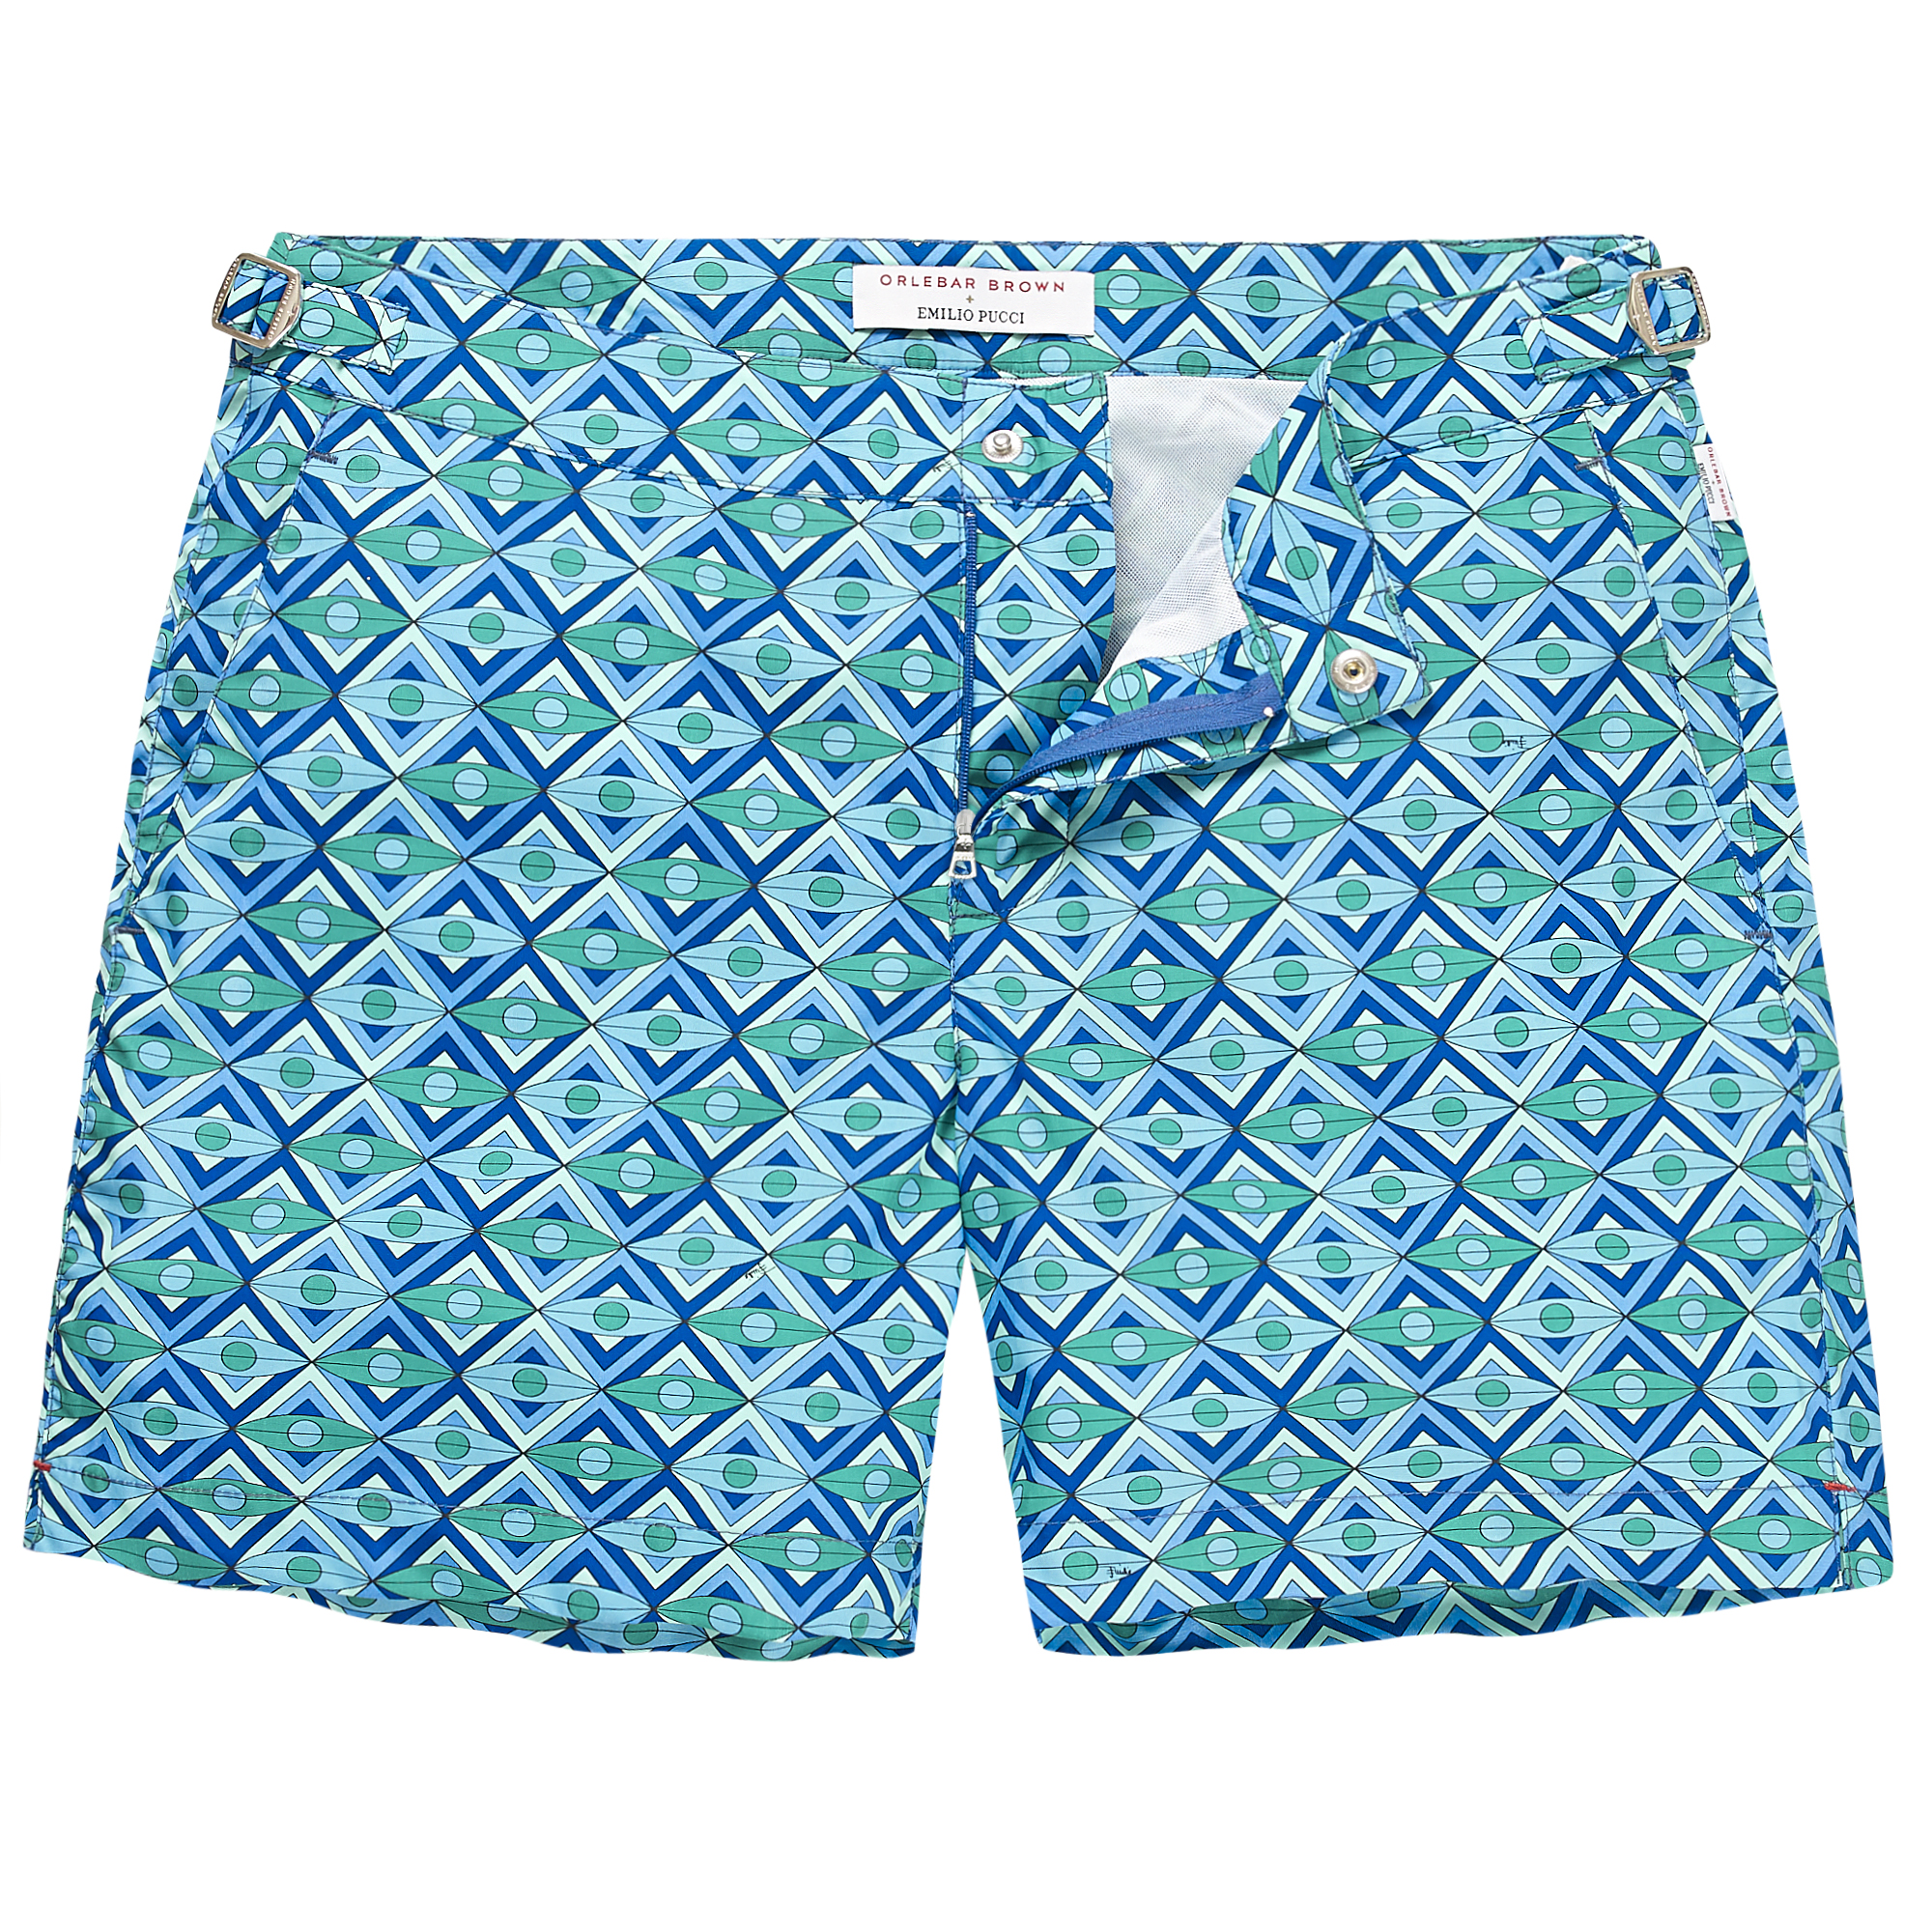 Emilio Pucci And Orlebar Brown Give Beach Garb A Colorful Redux